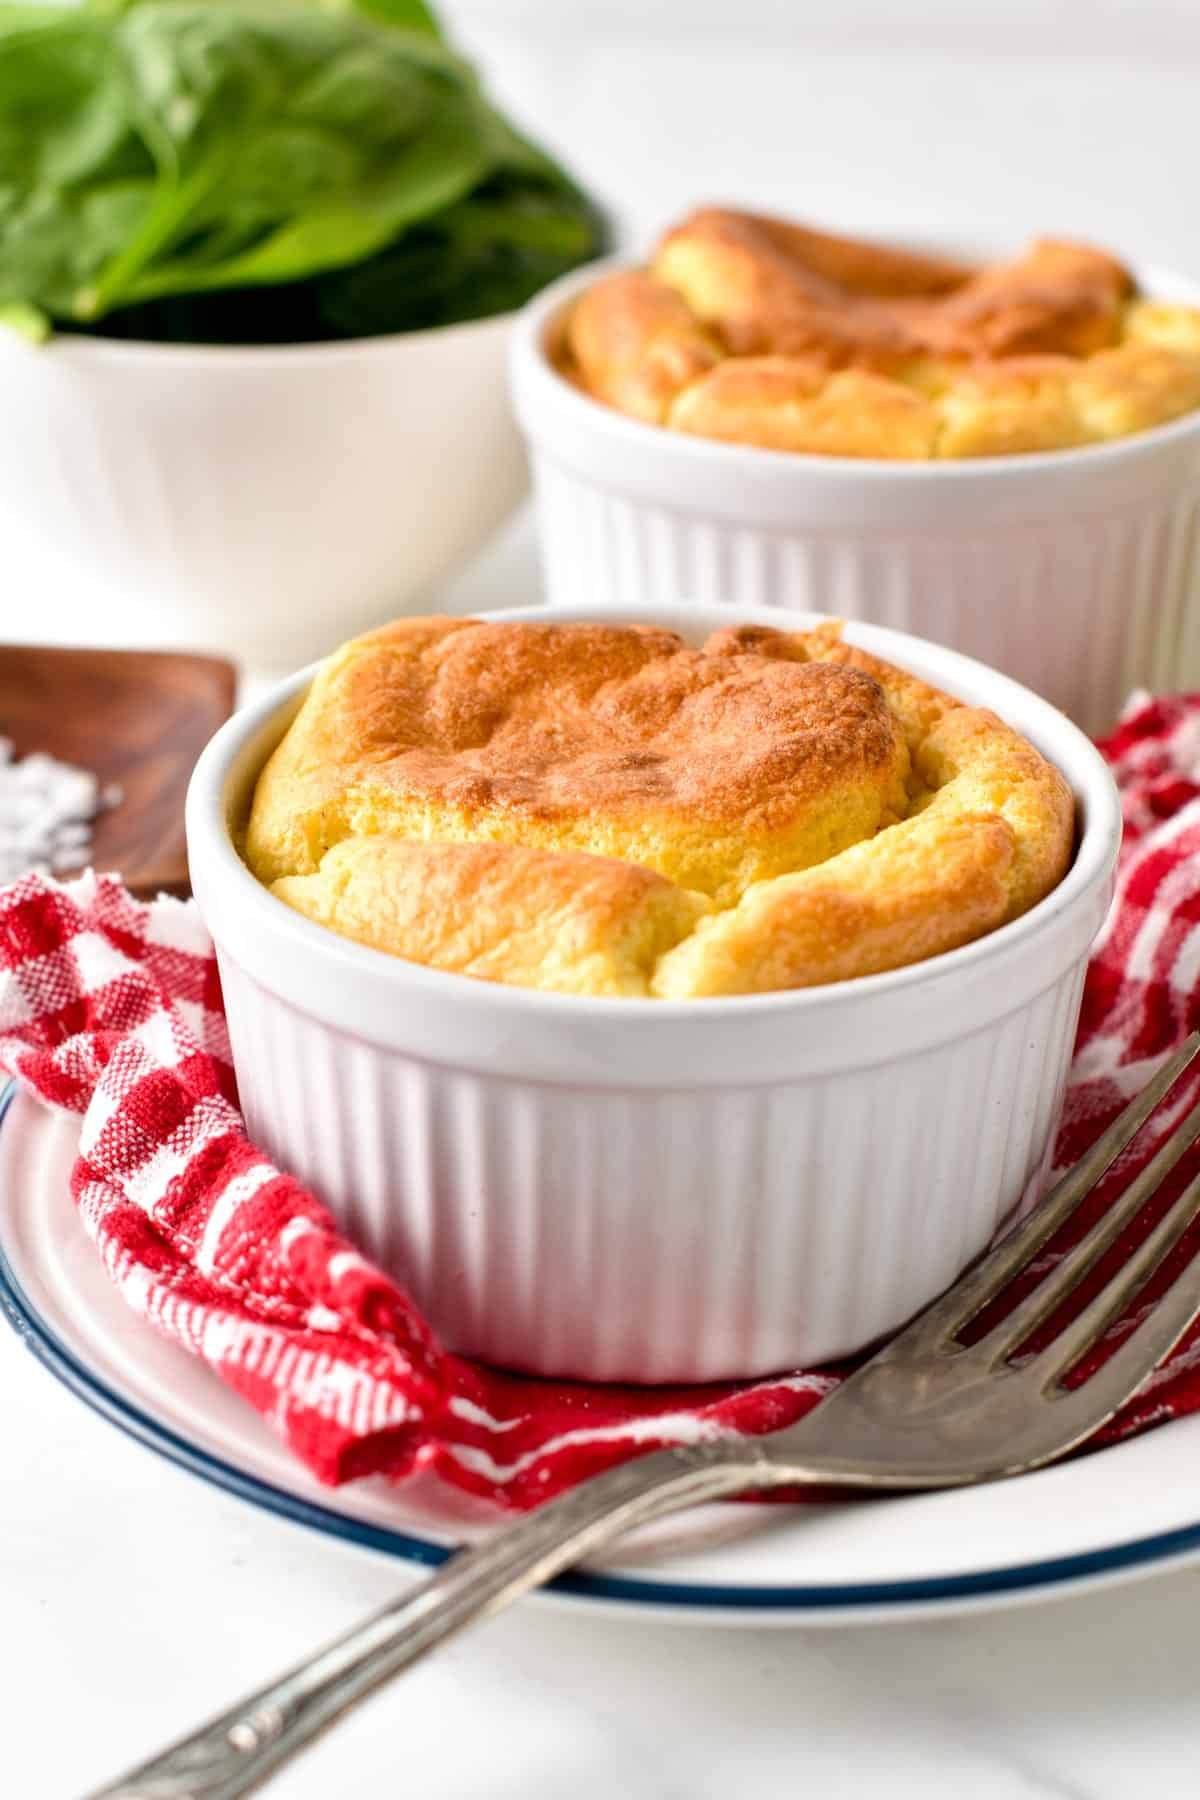 Egg souffle in a small ramekin on a plate lined with a checkered kitchen towel.